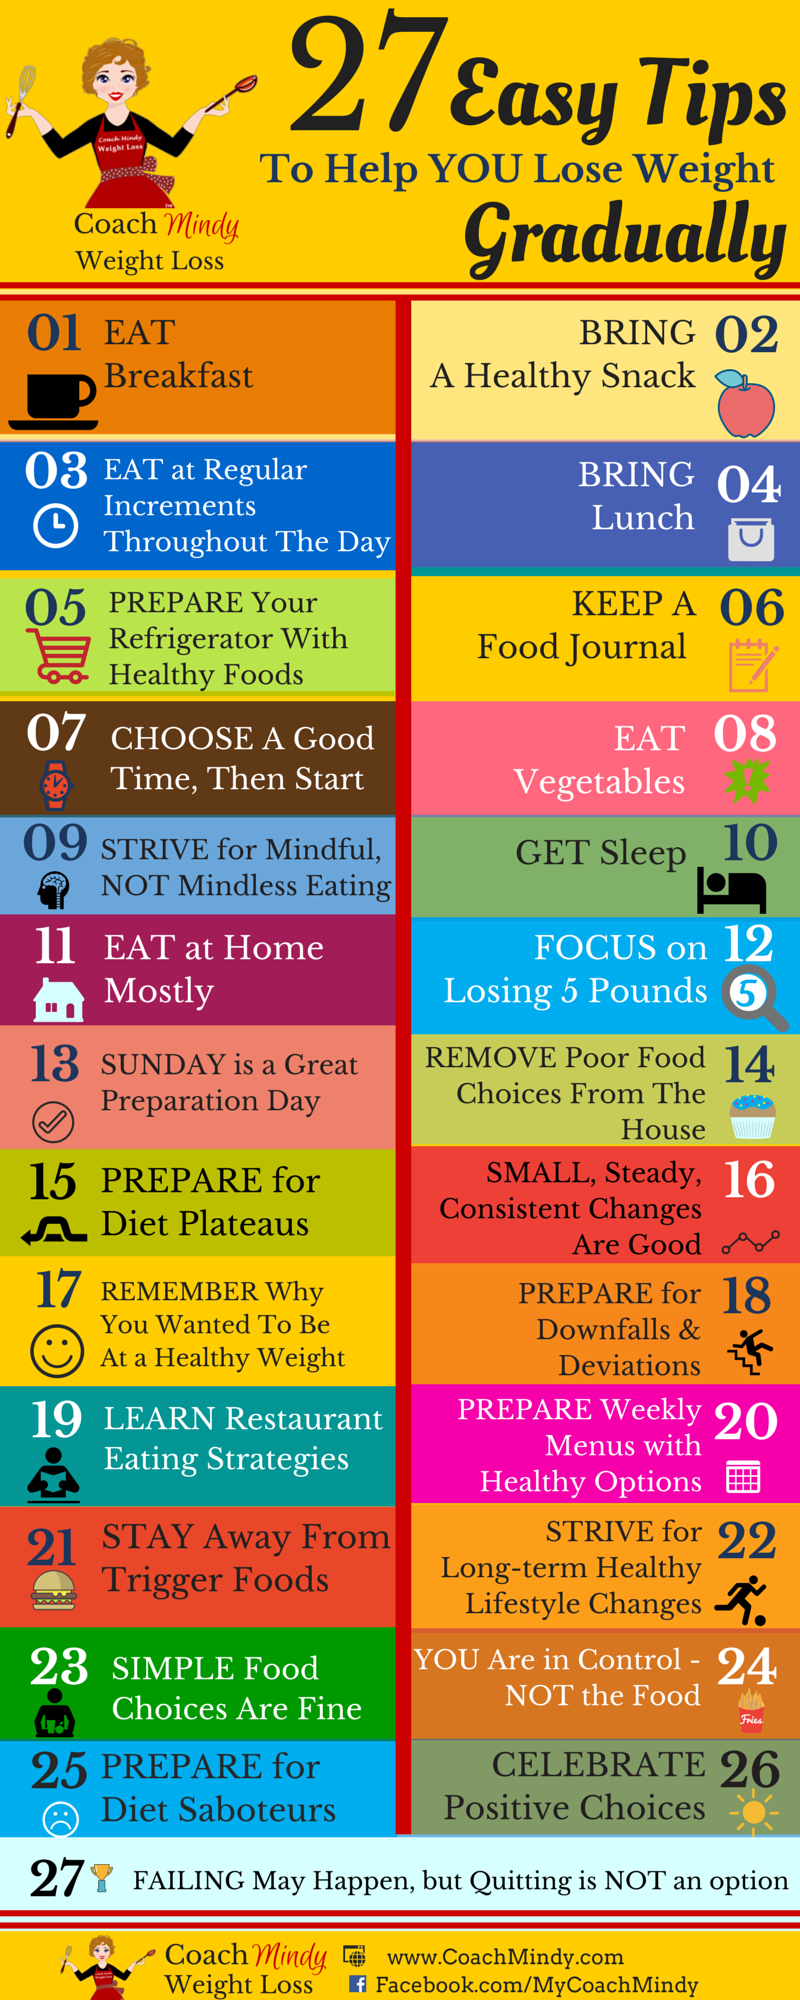 27 Easy Tips To Help You Lose Weight Gradually - Coach Mindy Premier Weight  Loss Coach